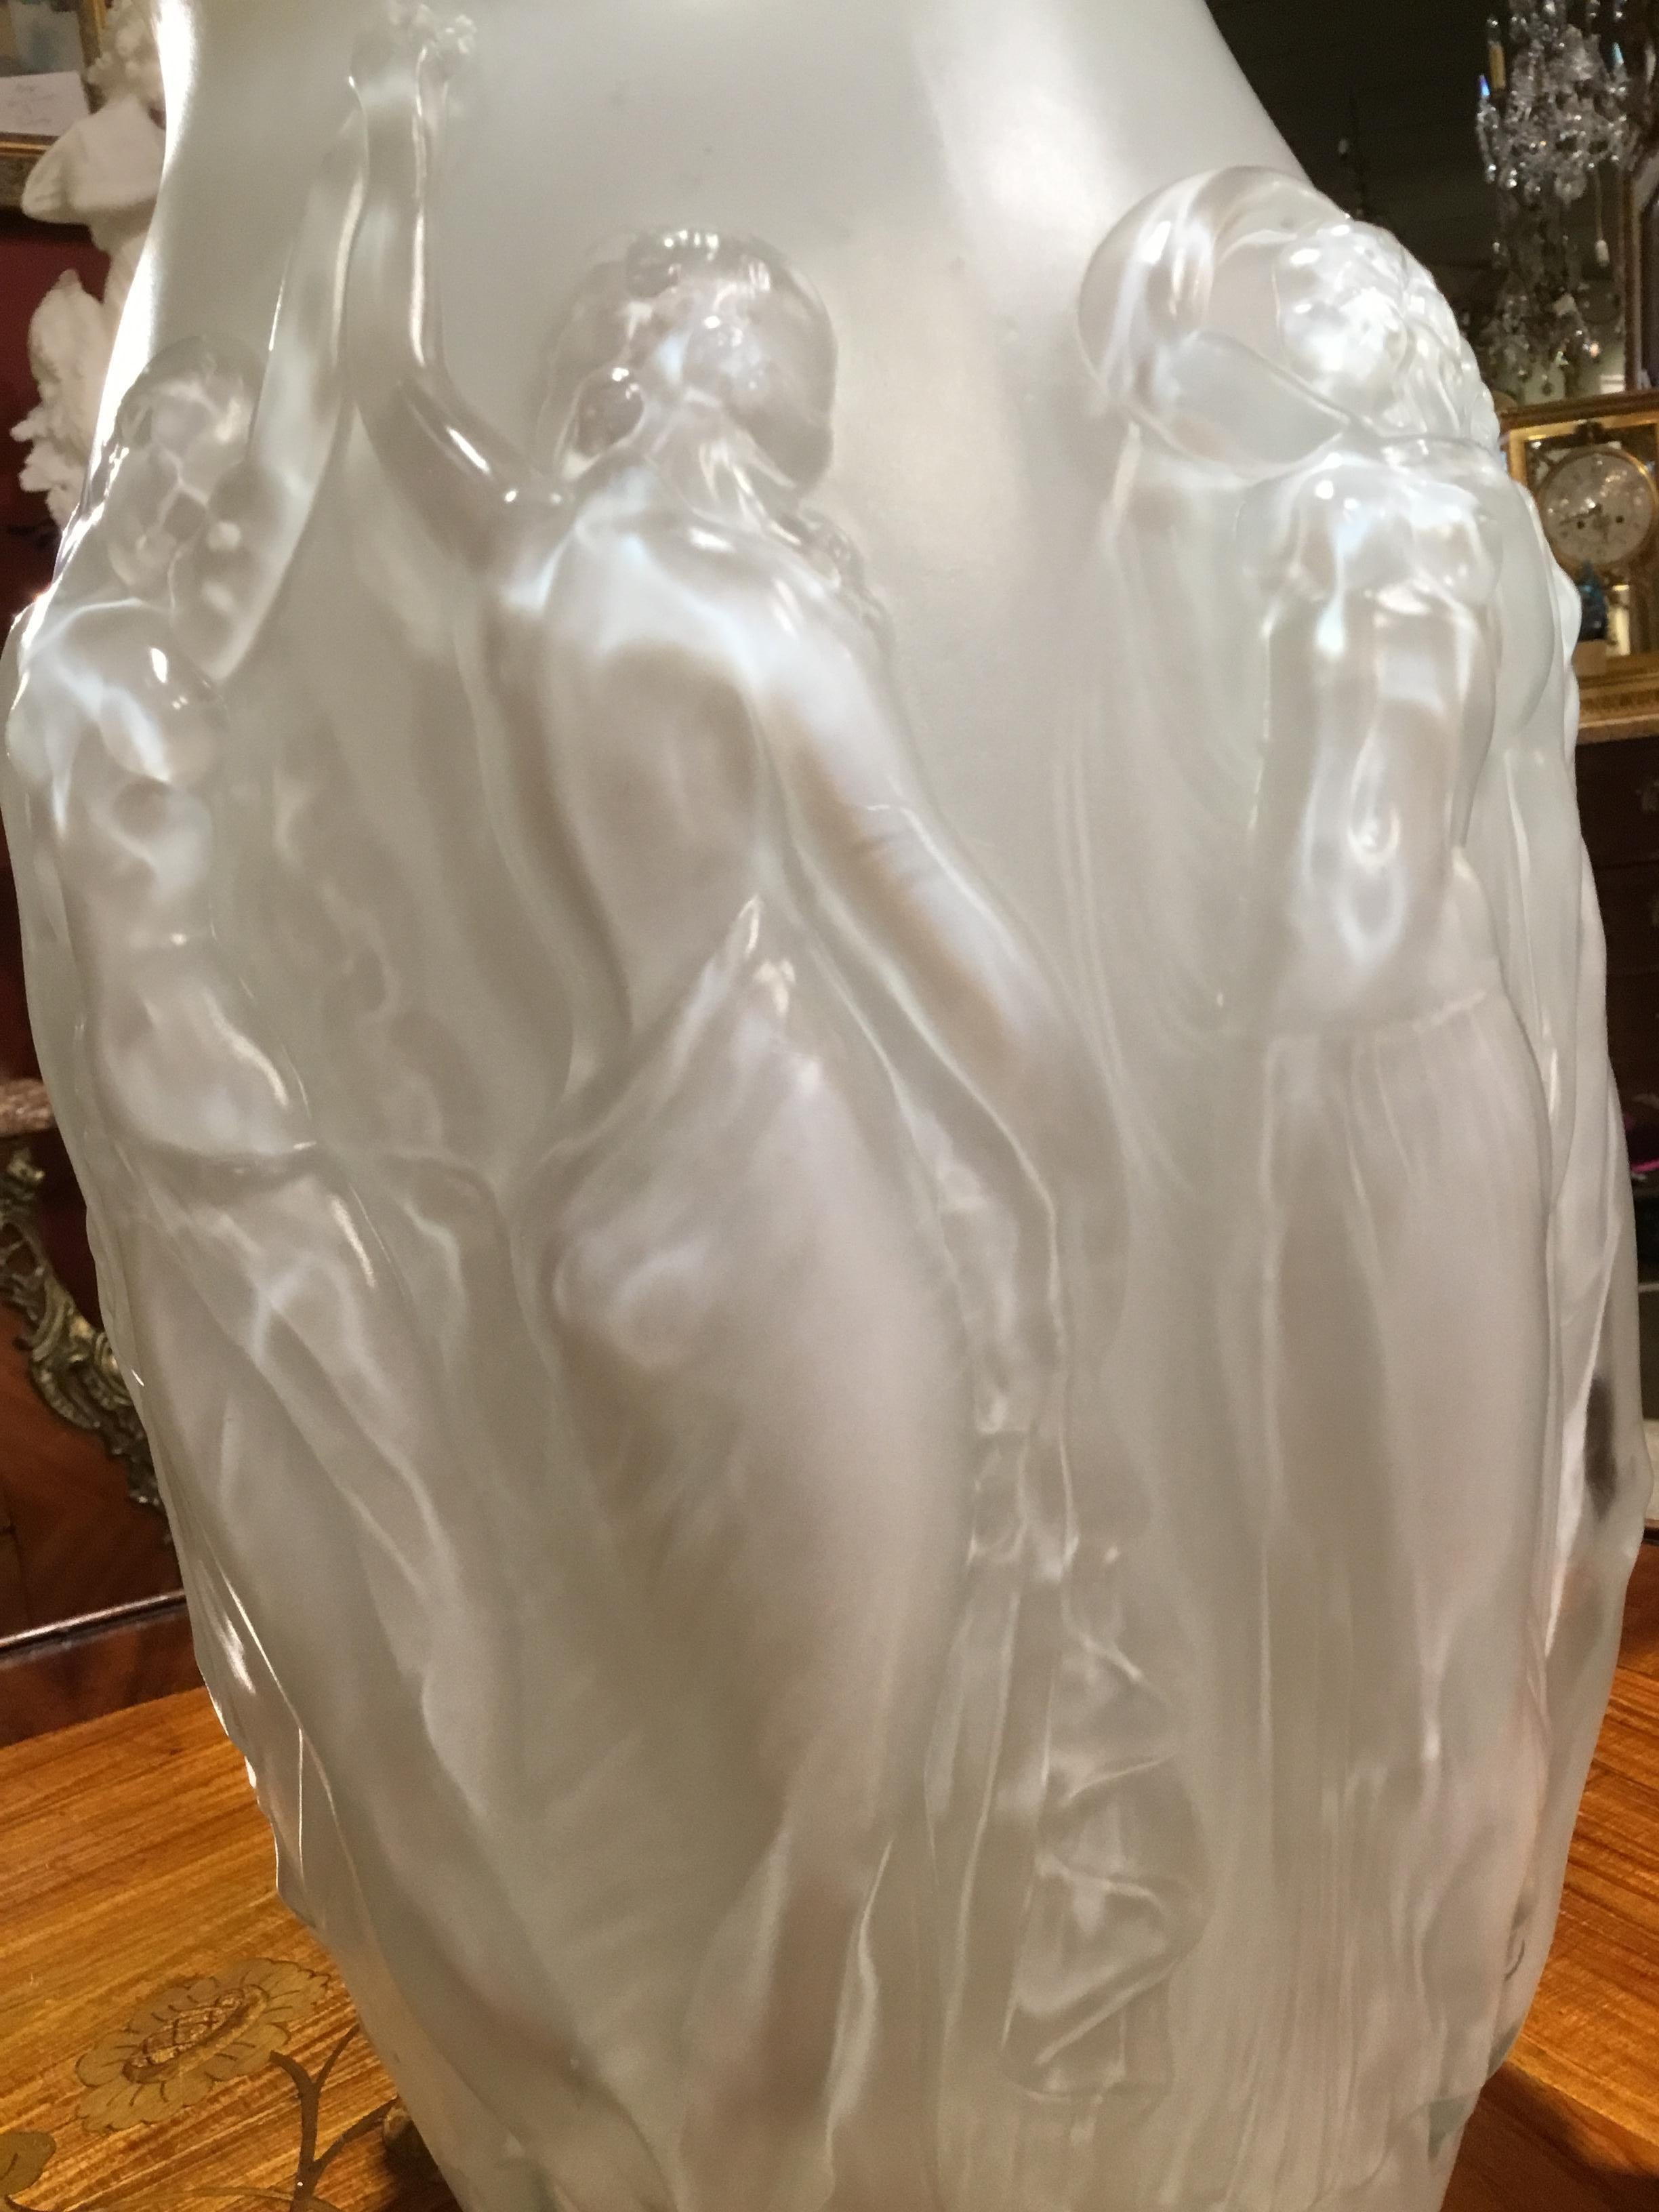 20th Century Sabino/France Mouth Blown Vase “La Danse” in Translucent White Glass of Dancers